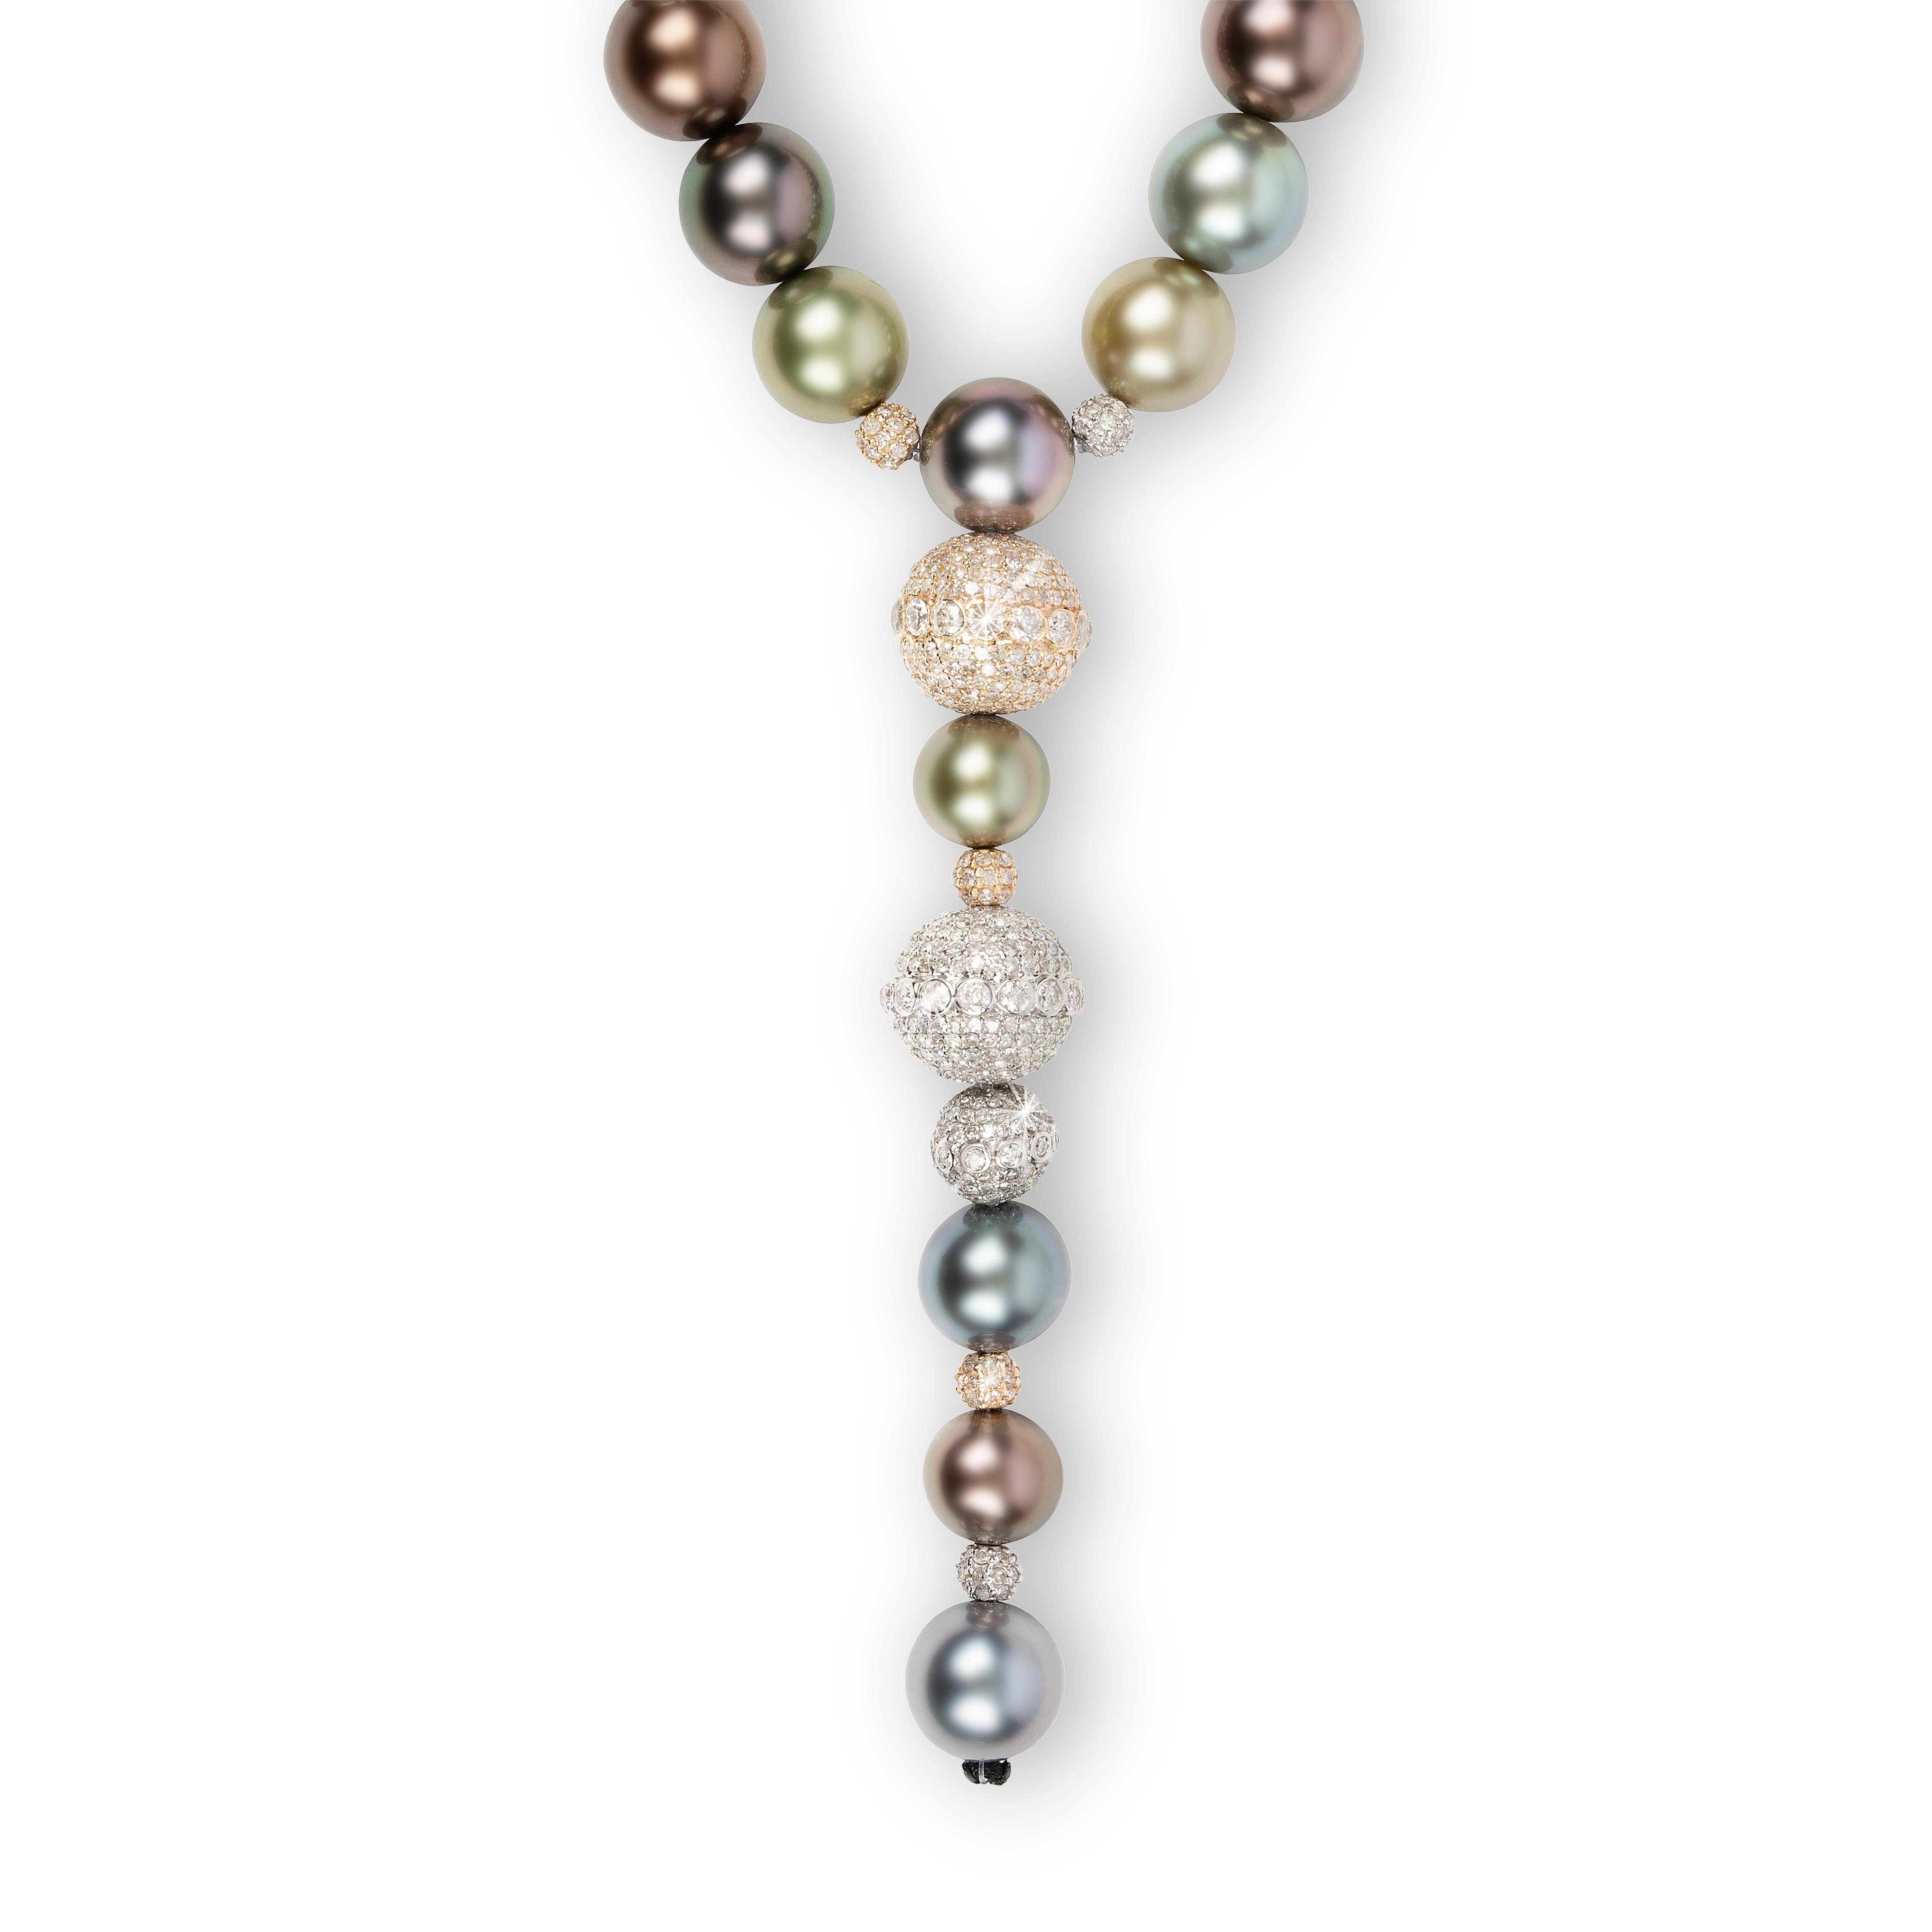 THEVAULT15´s masterpiece necklace. Made from the most lustrous, rare top-grade Tahiti pearls and 18k diamond beads, it is designed for a soft structure with a couture luxe feel. Its lariat shape perfectly complements plunging necklines. While every